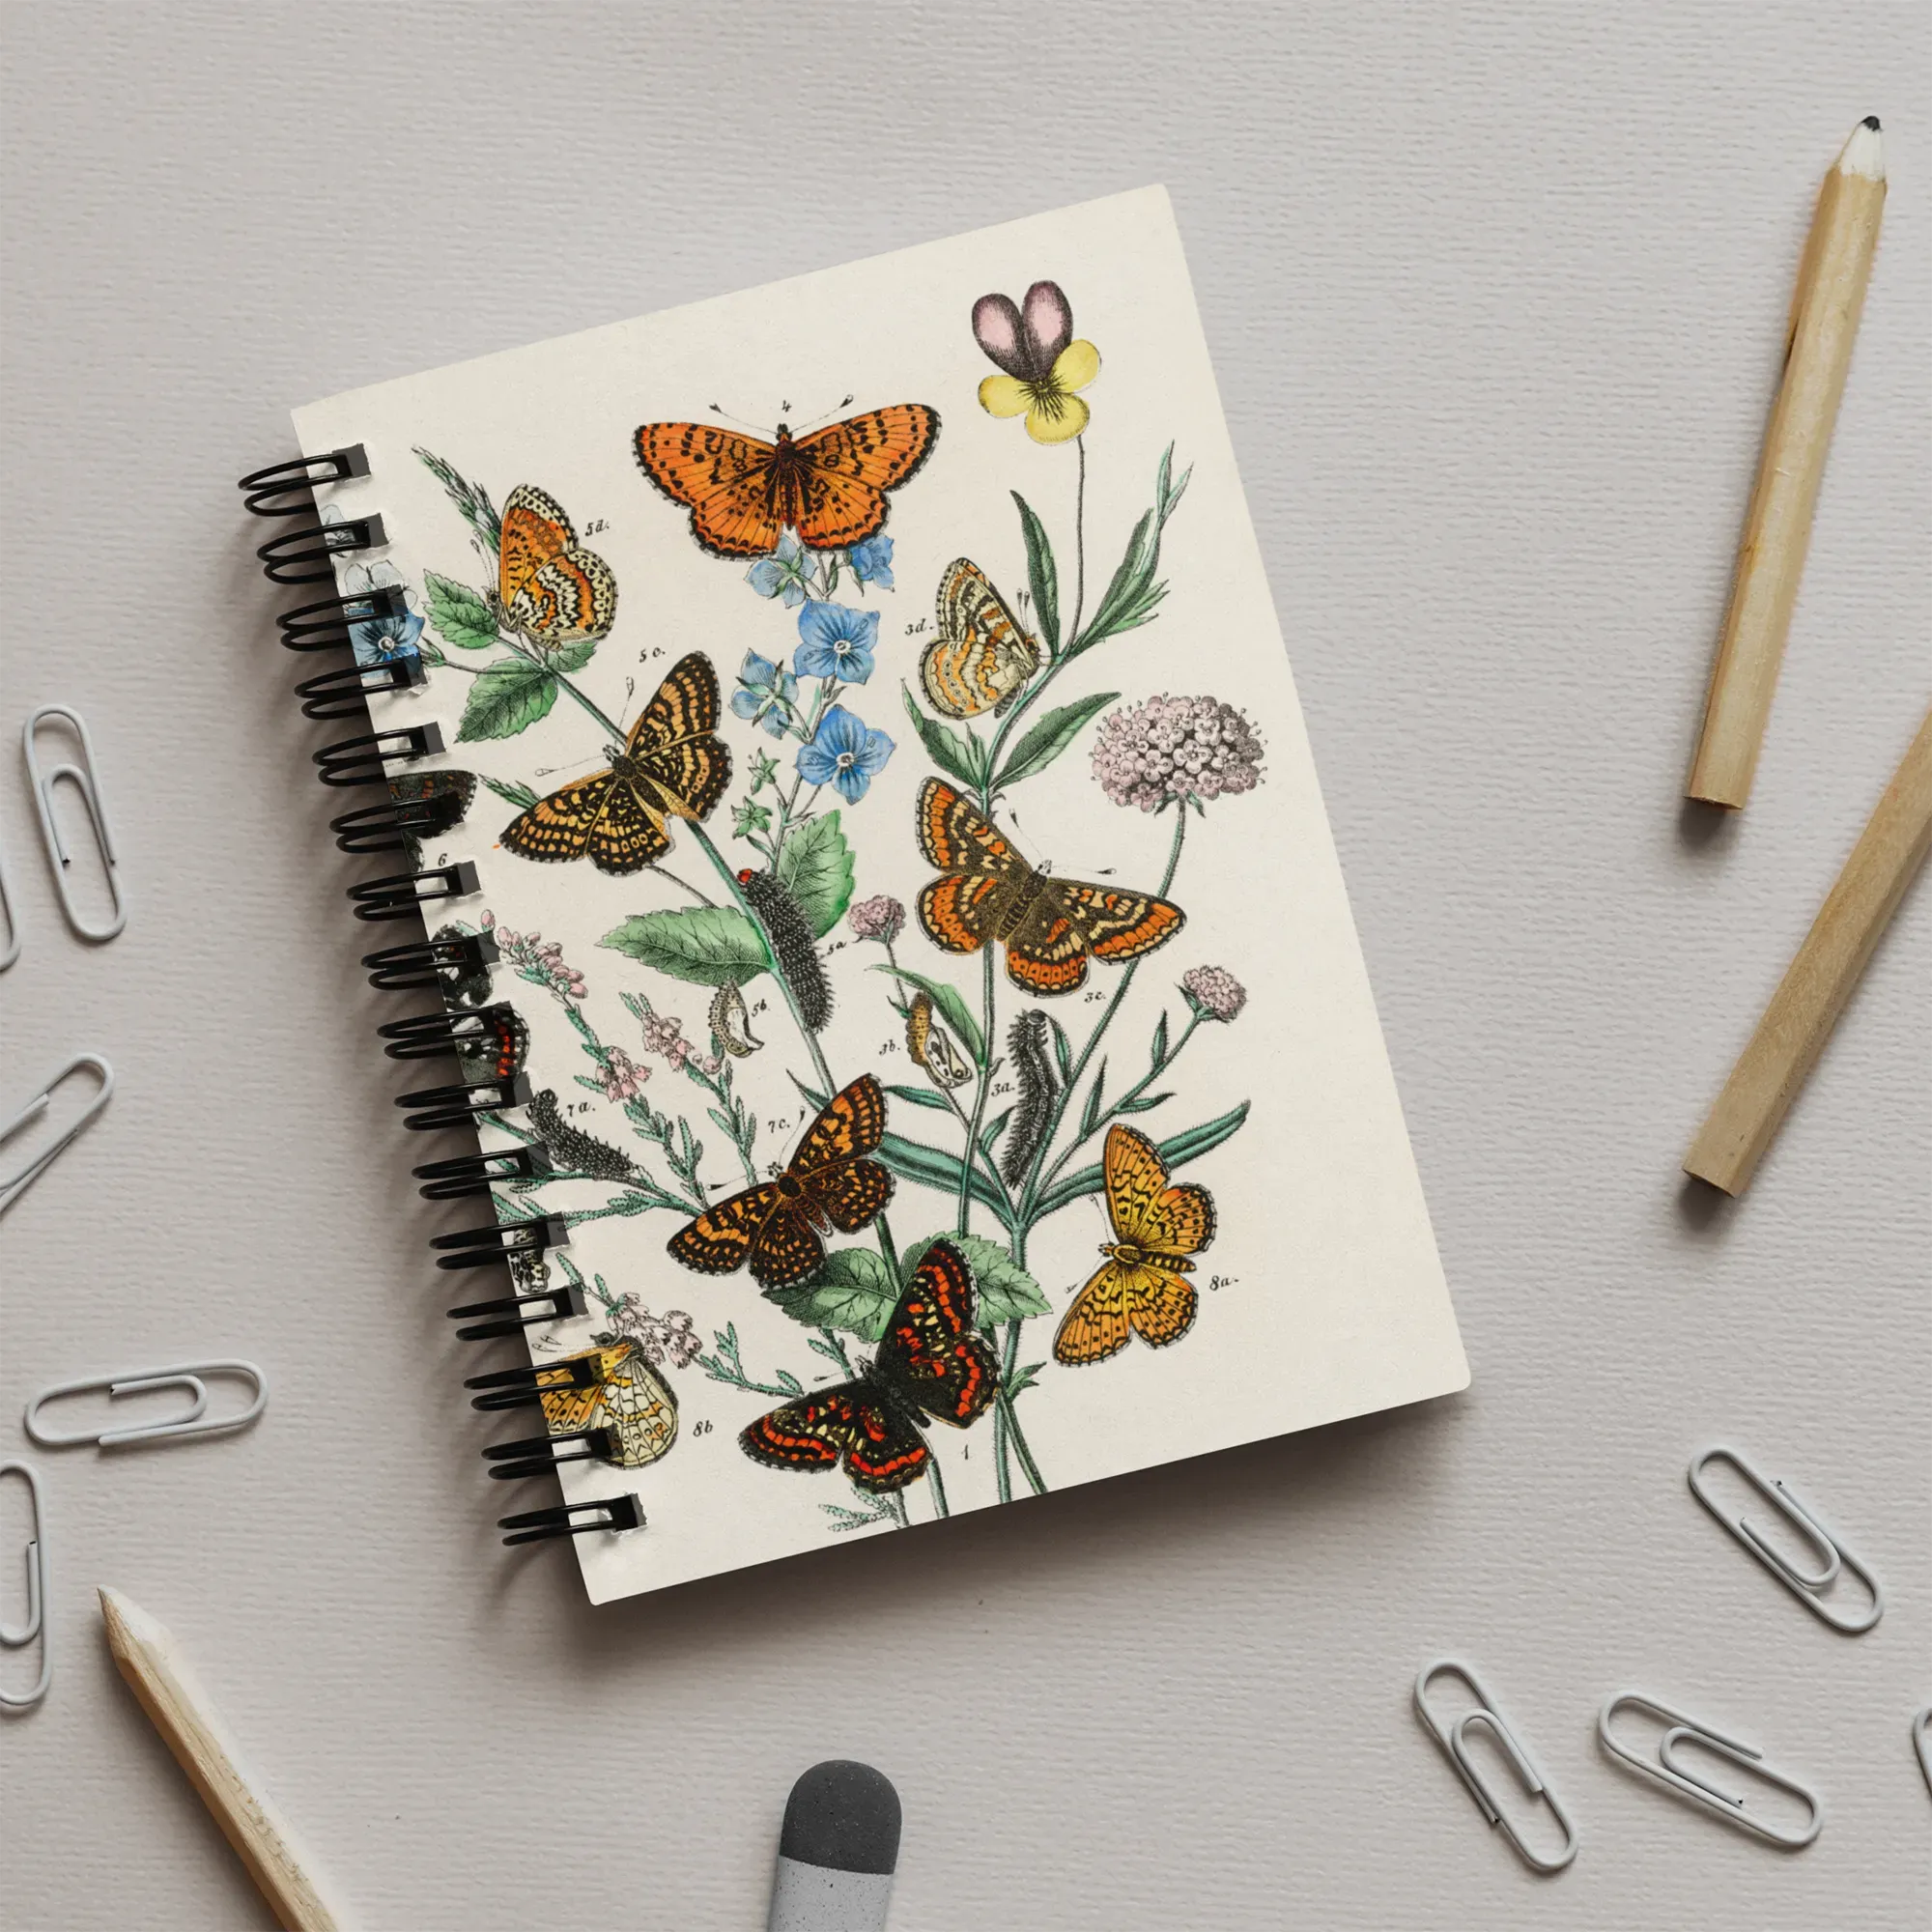 European Butterflies And Moths 2 By William Forsell Kirby Notebook - Notebooks & Notepads - Aesthetic Art